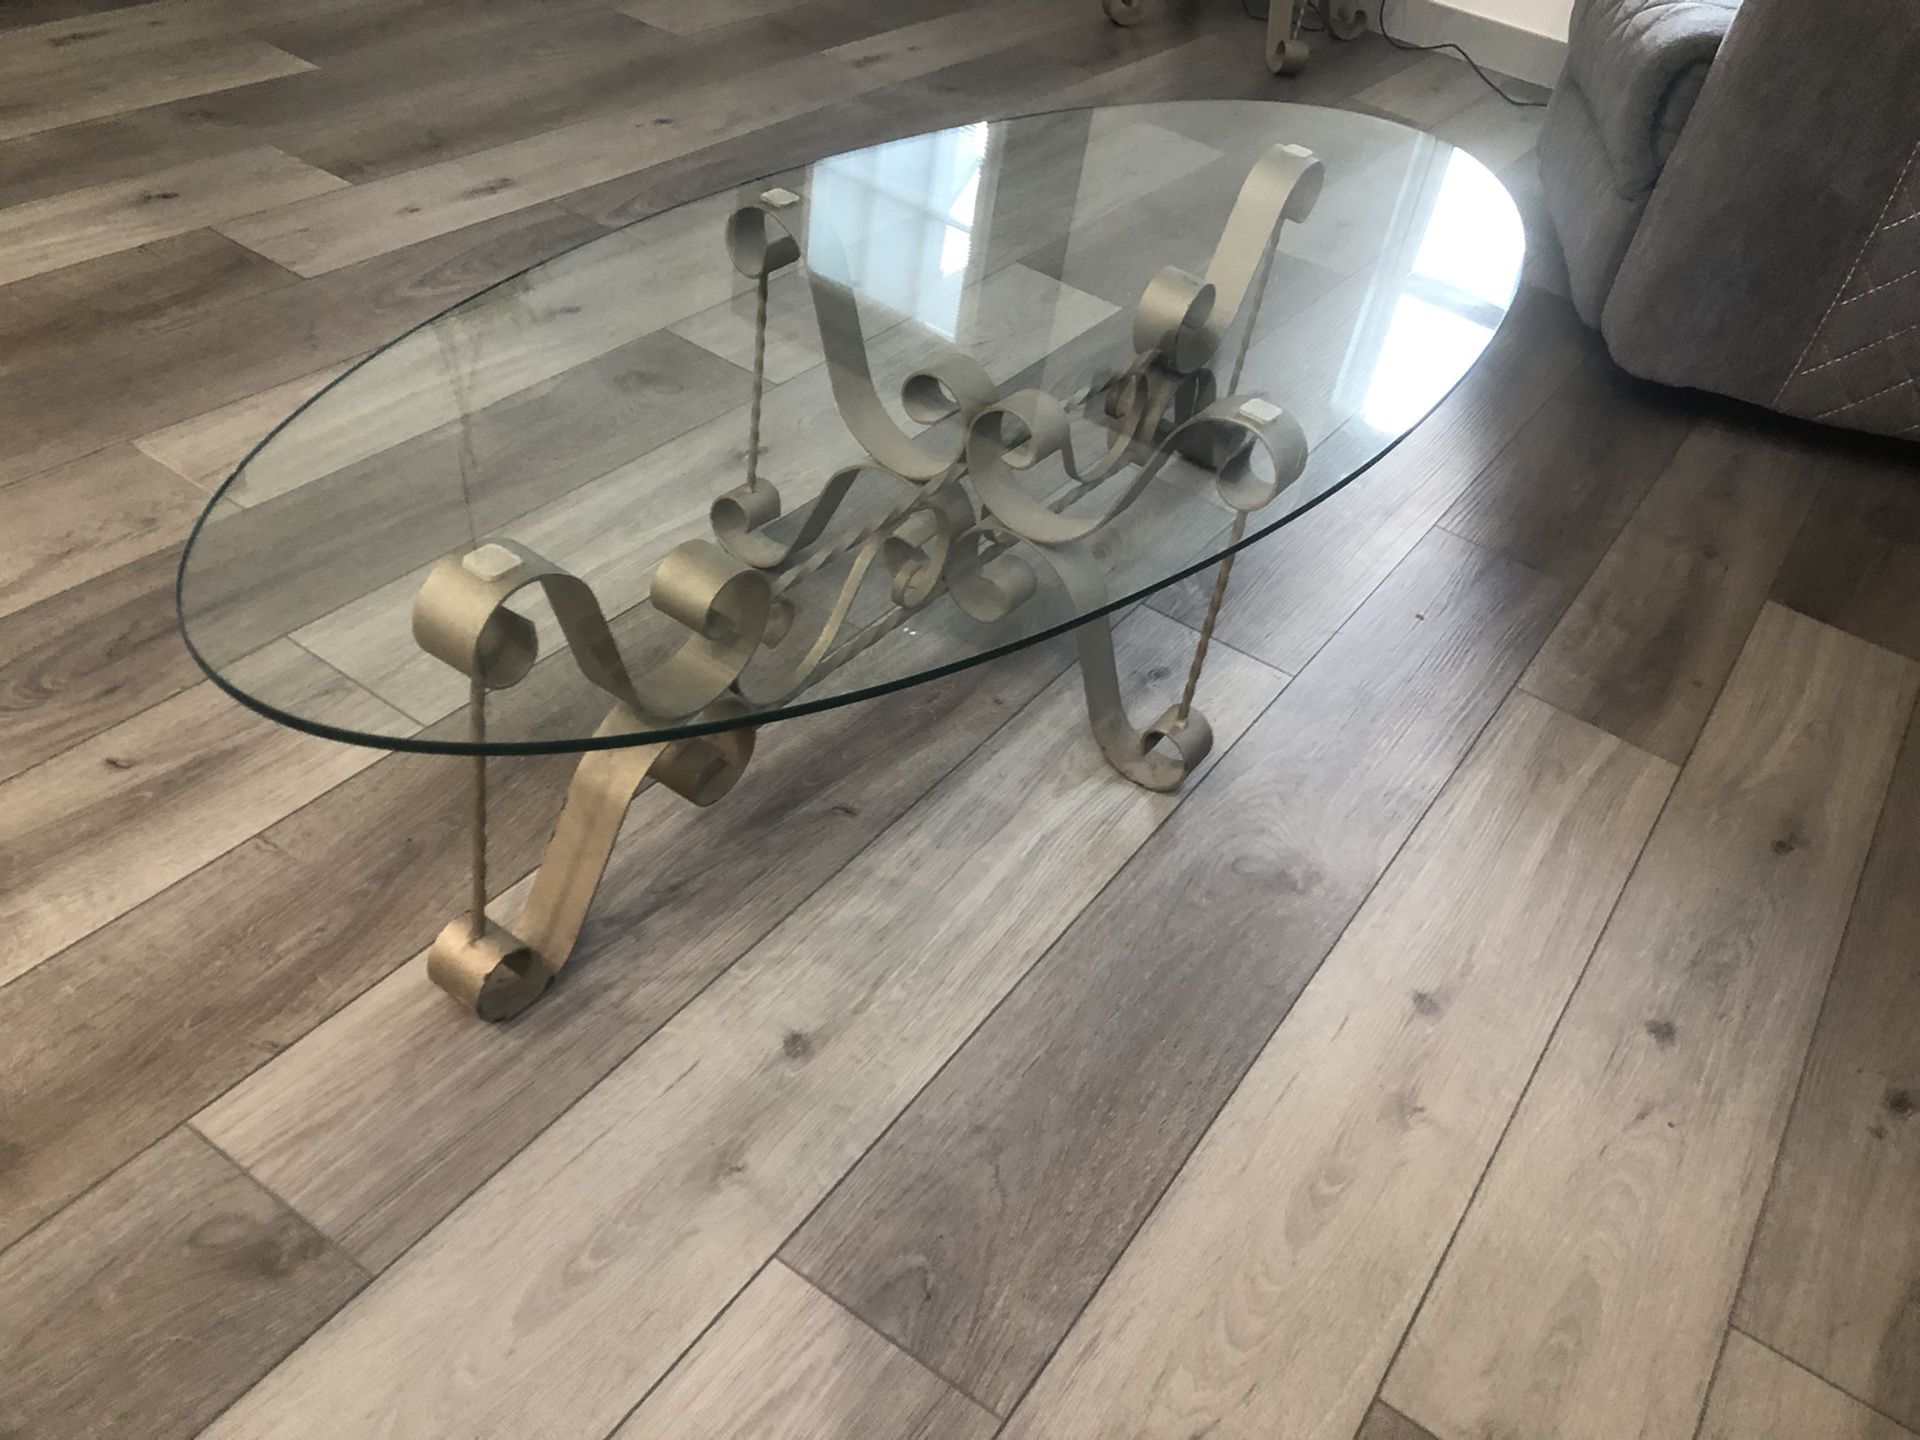 Antique Glass Tables - Matching 3 Piece